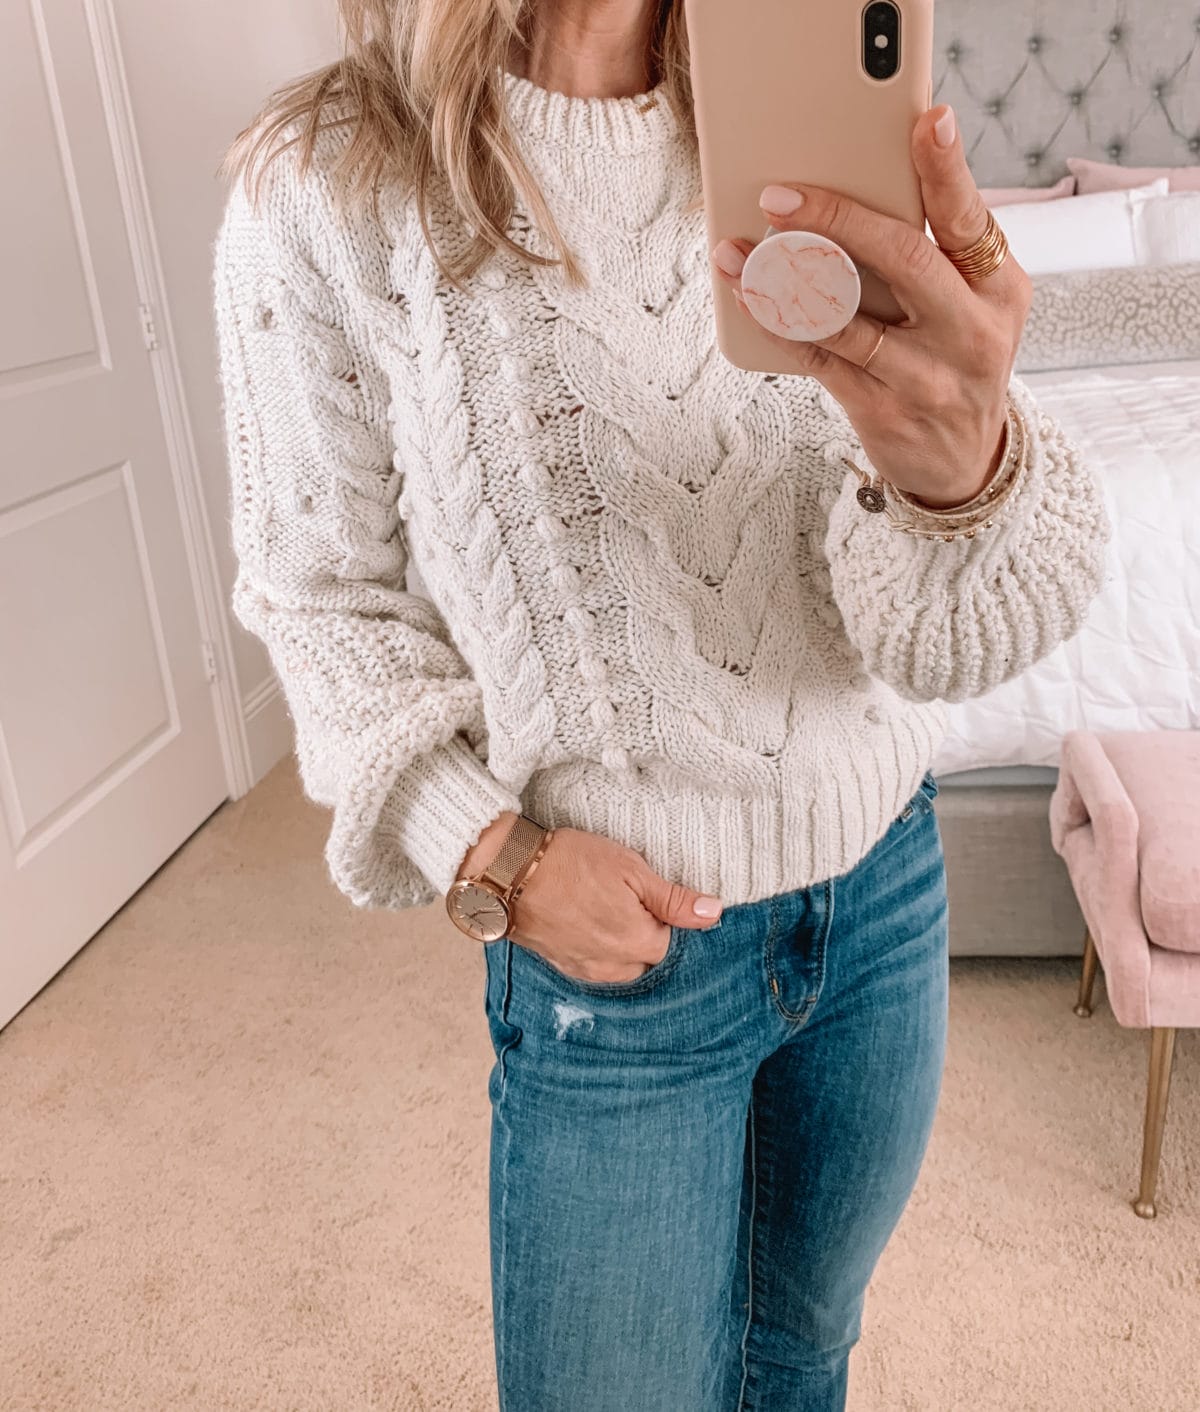 Amazon Fashion Faves, Chunky Knit Sweater, Jeans, Booties 